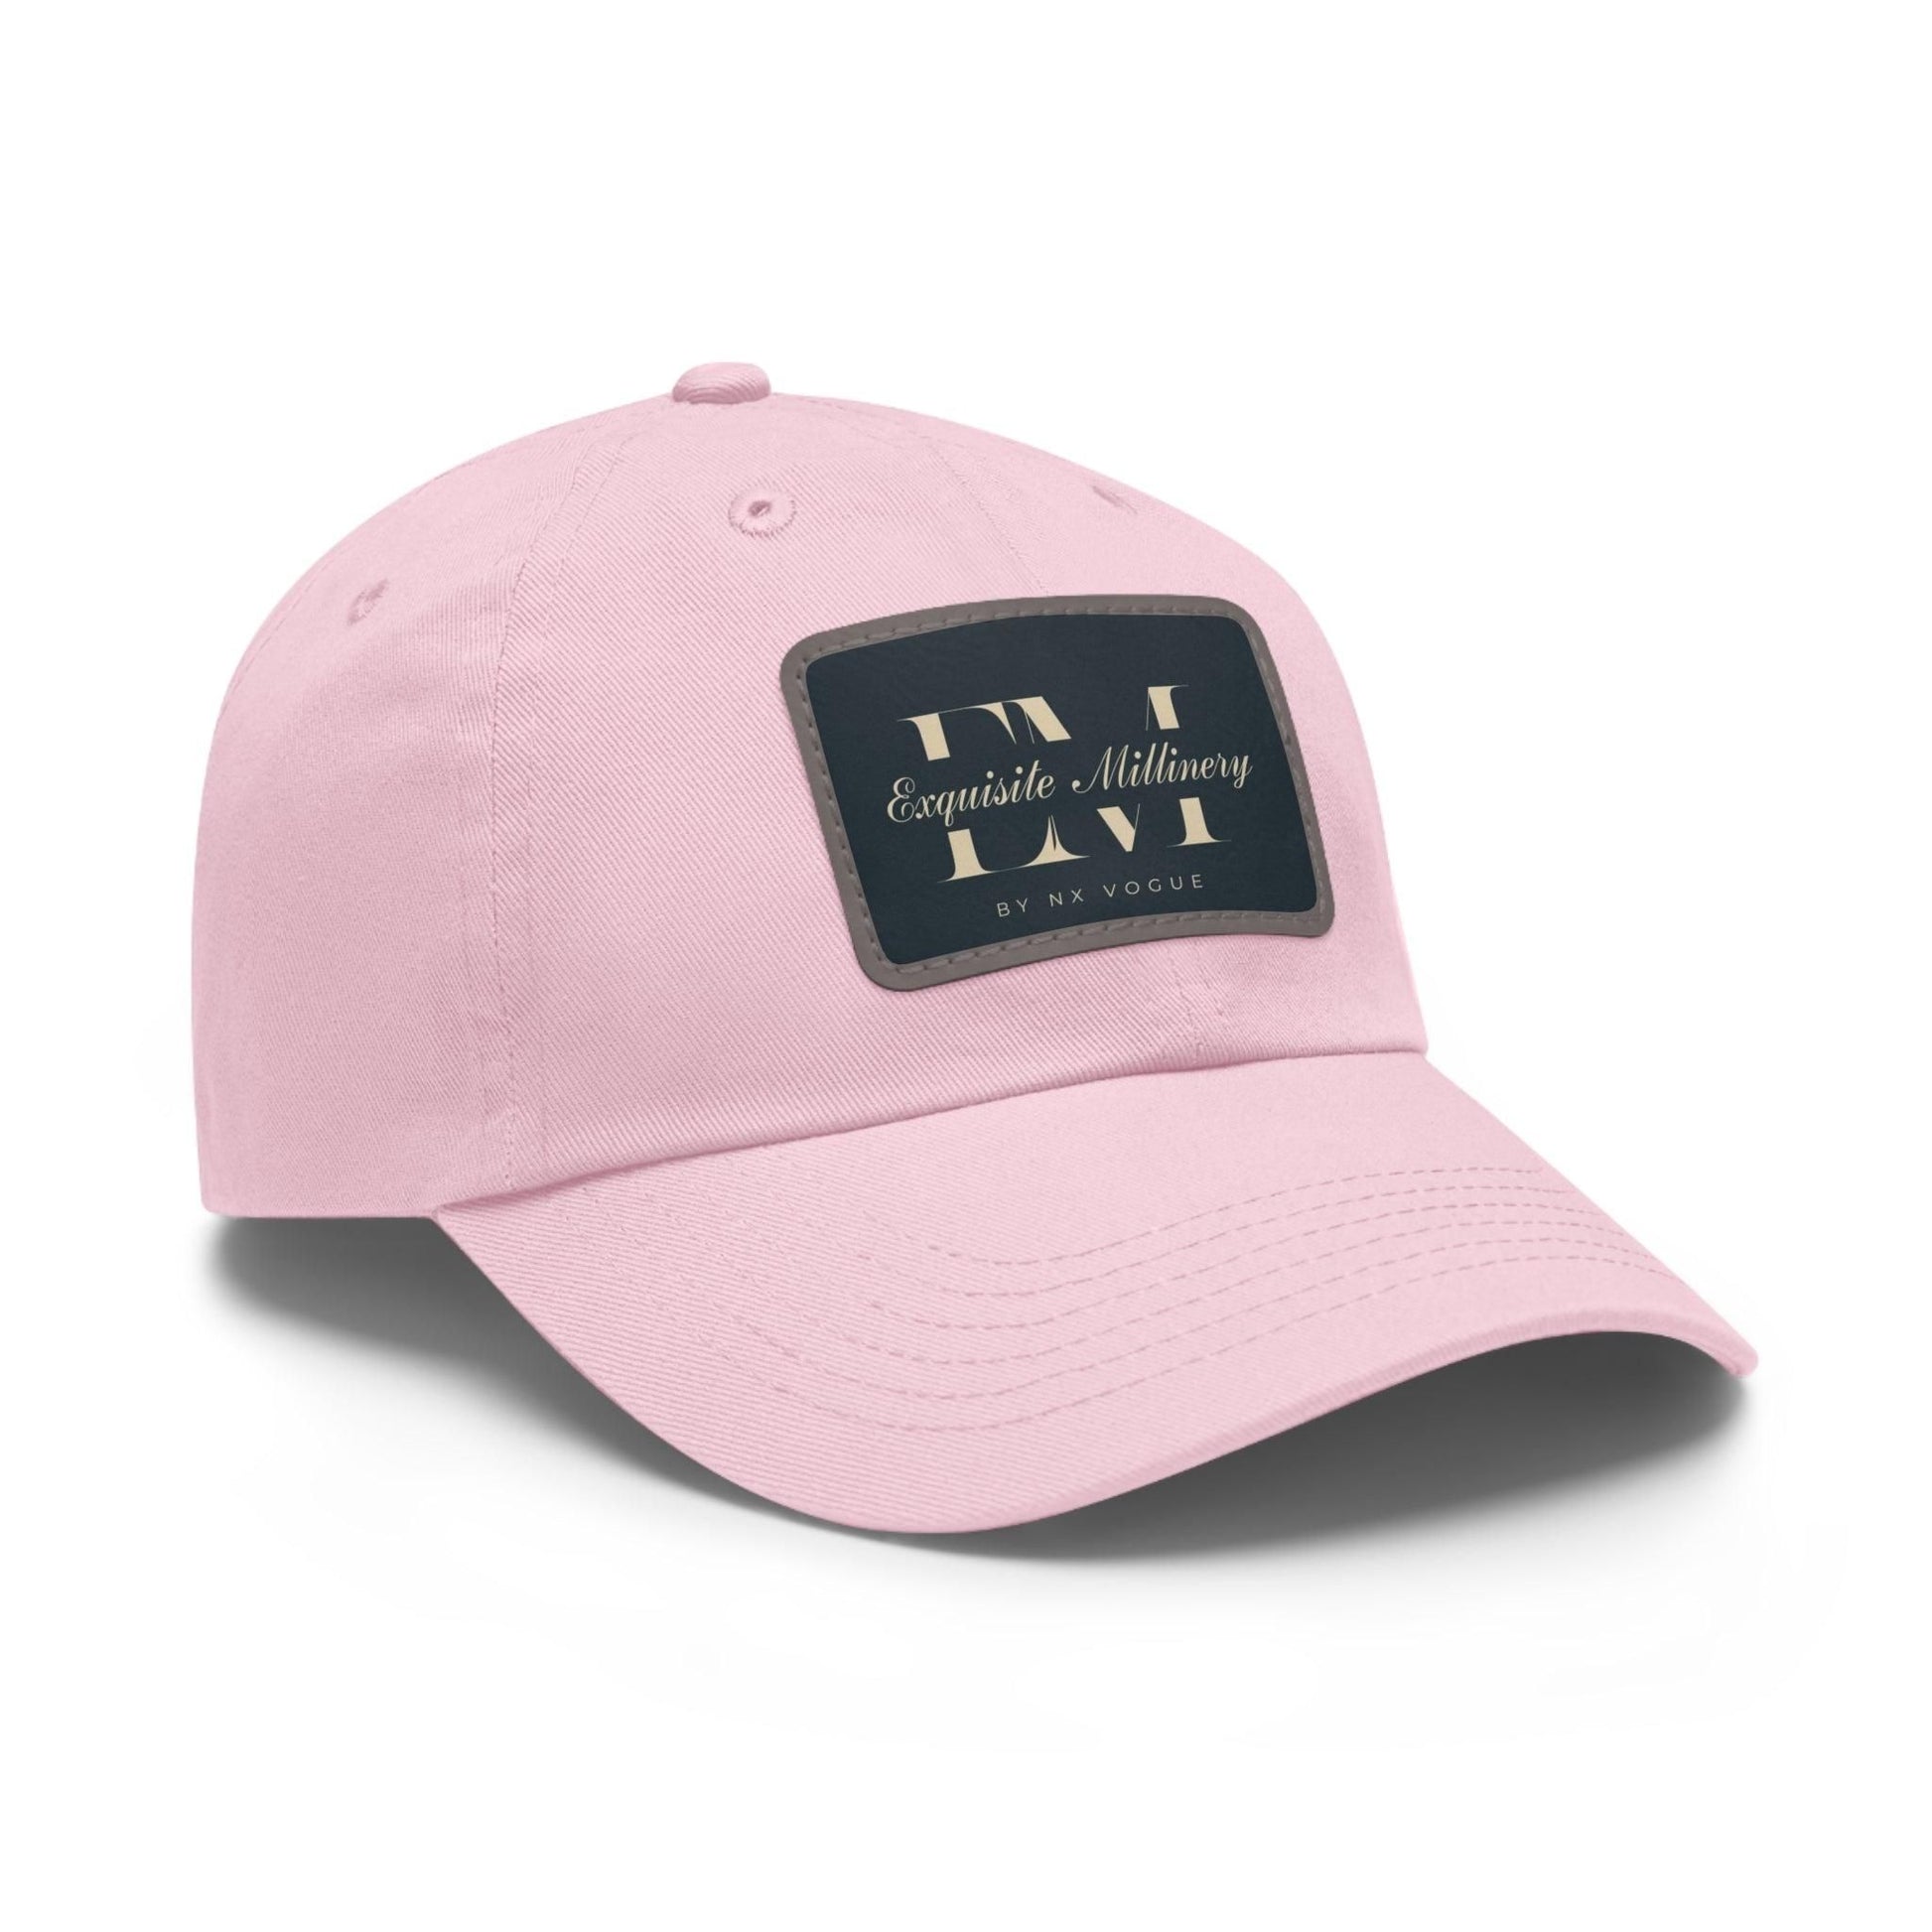 Exquisite Millinery Baseball Cap with Leather Patch Cap Light Pink / Grey patch Rectangle One size